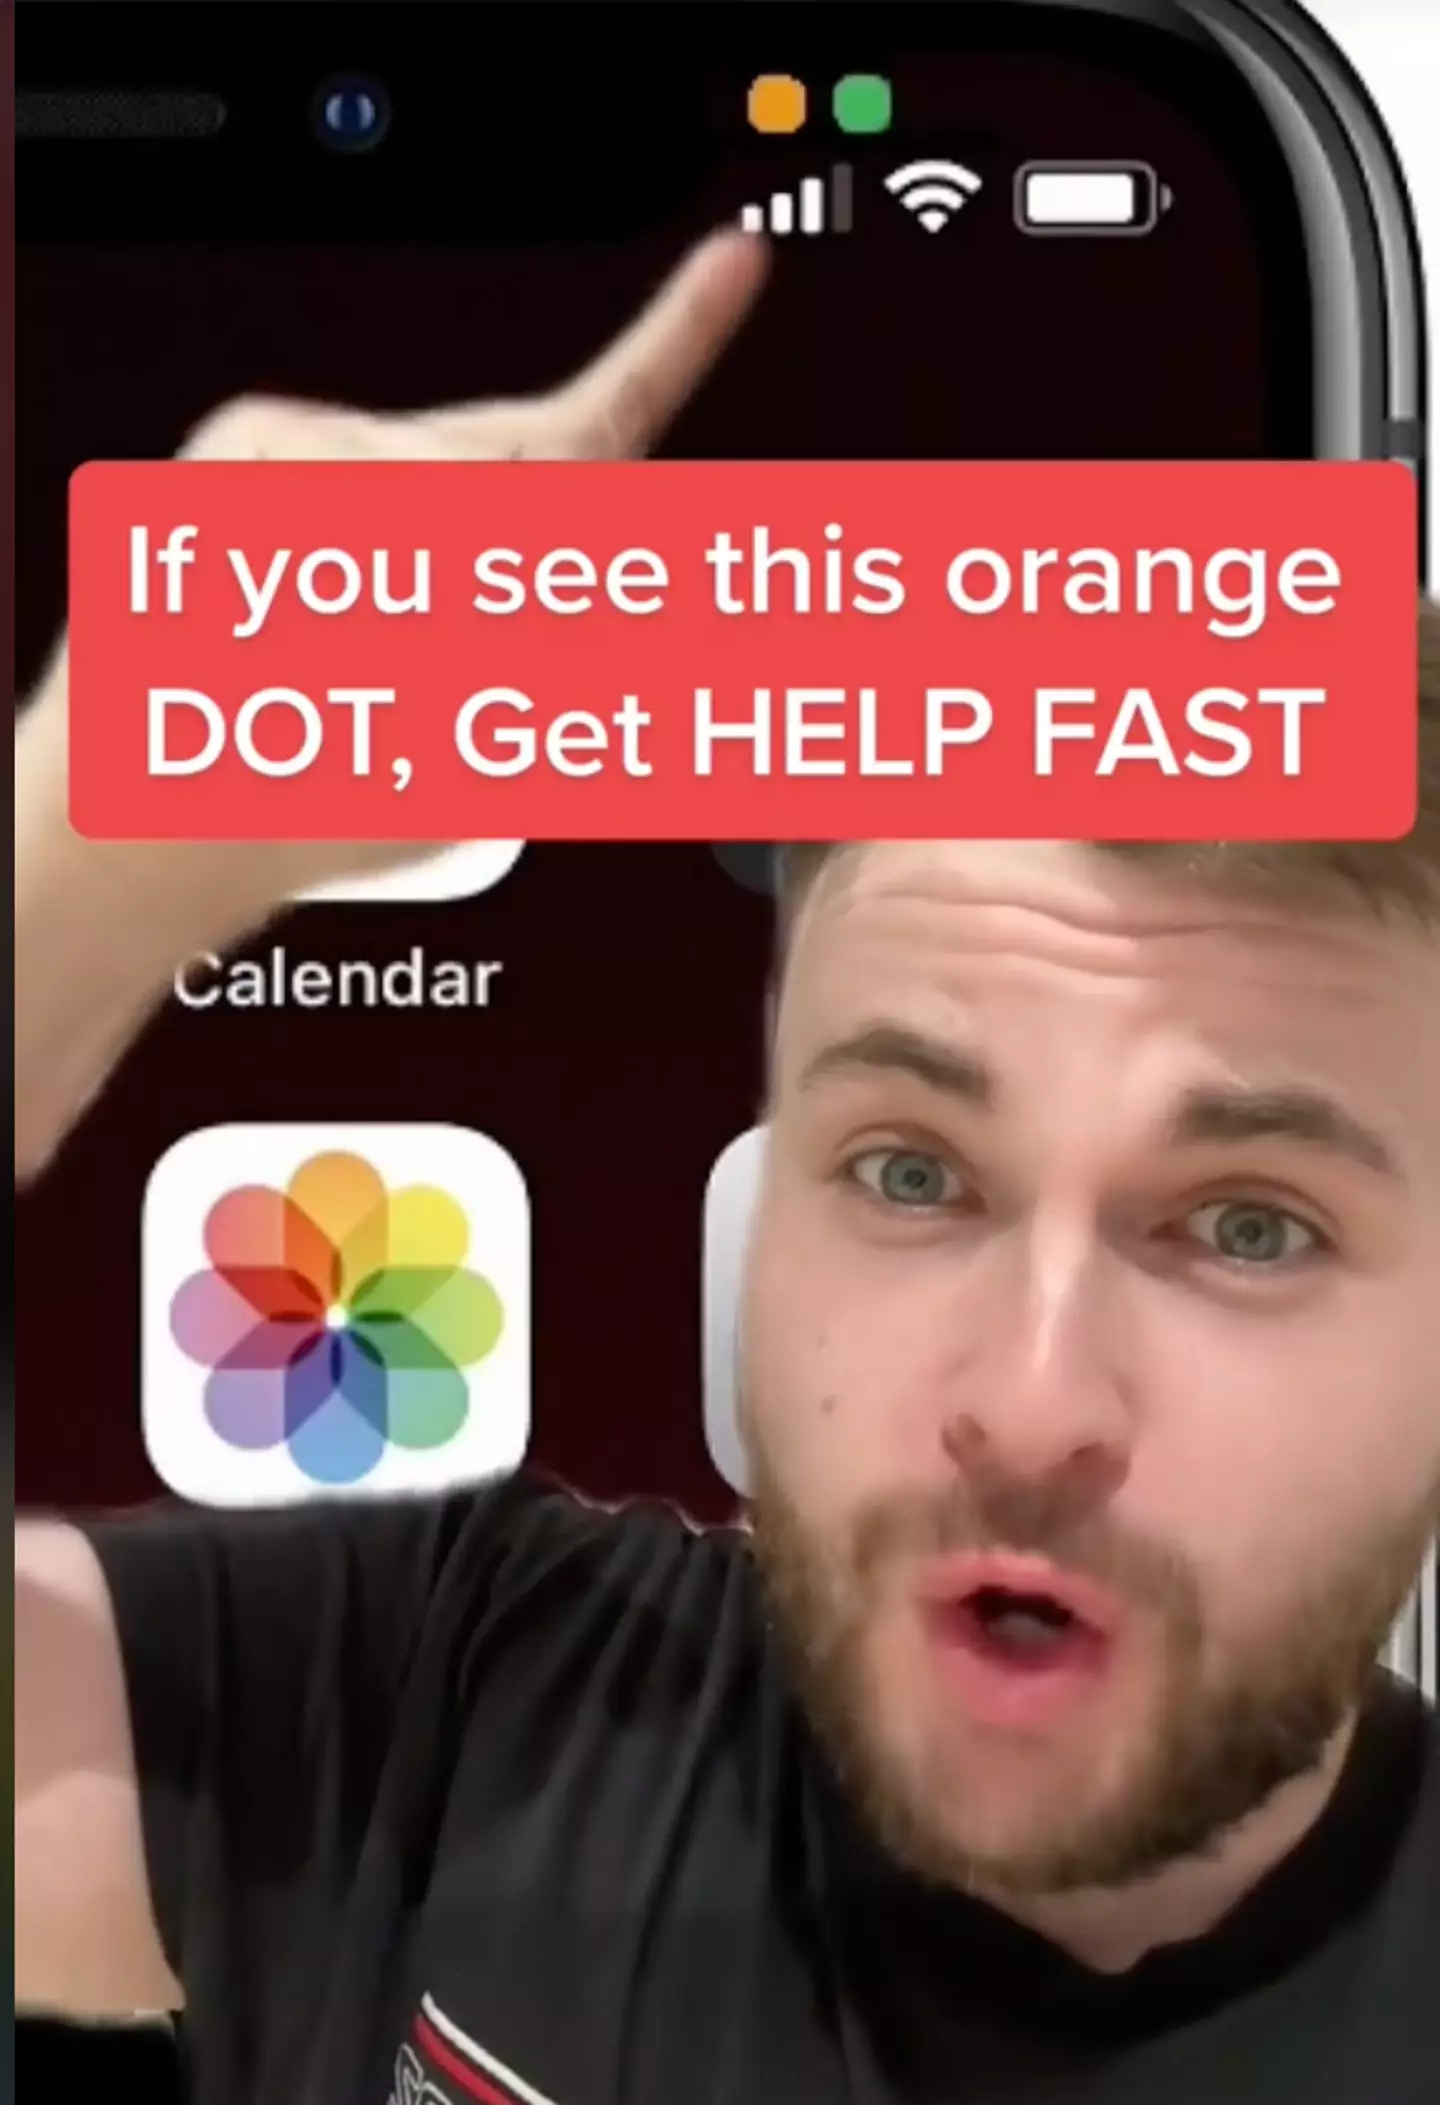 Jamie Nyland took to TikTok to warn iPhone users about the orange dot at the top of their screen.